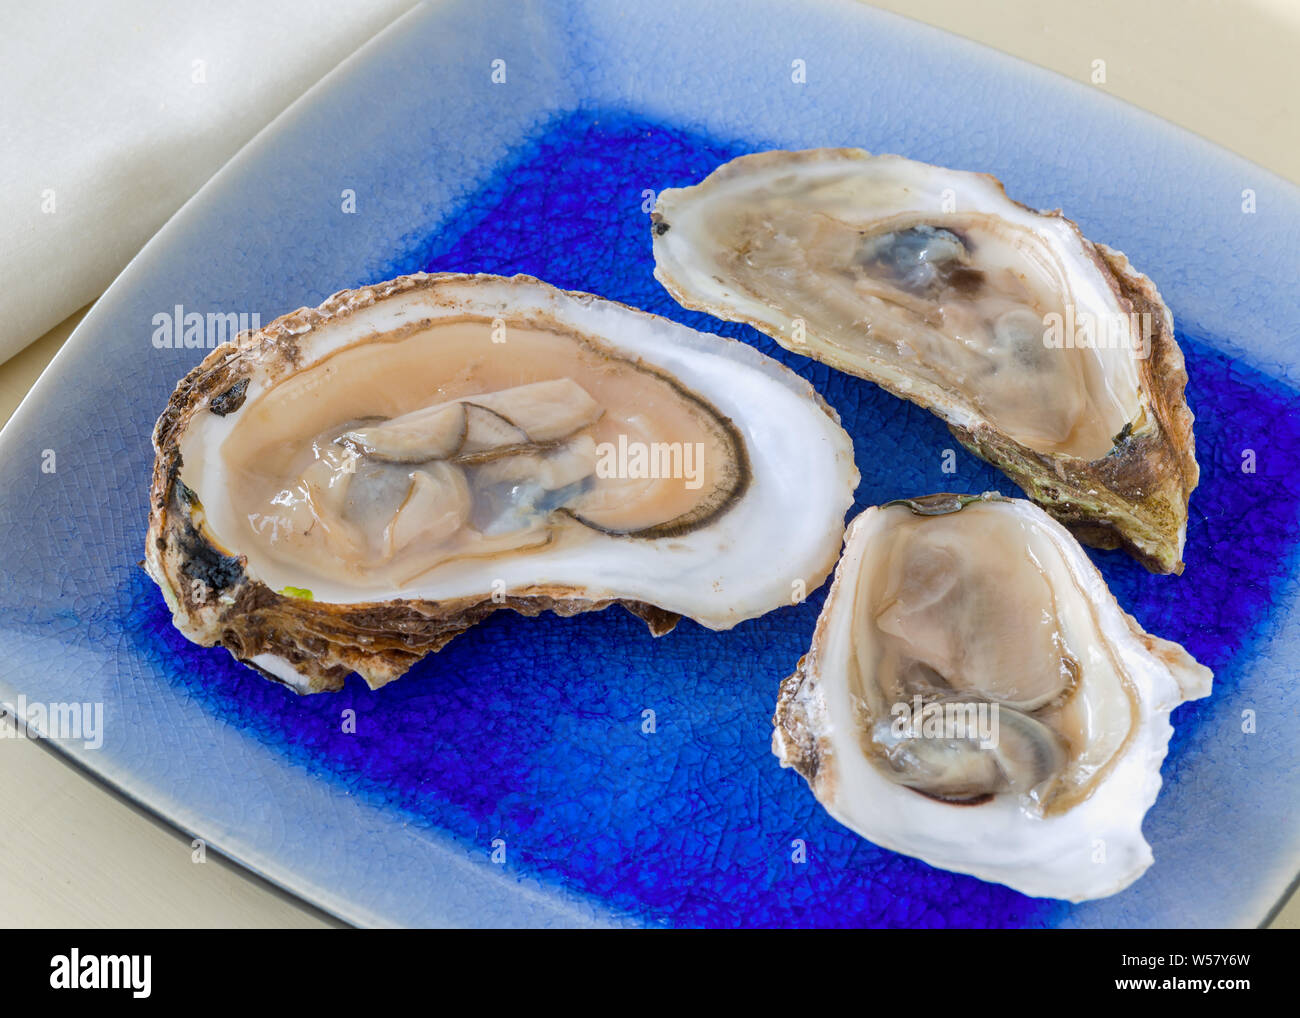 Opened raw oysters on a plate. Stock Photo